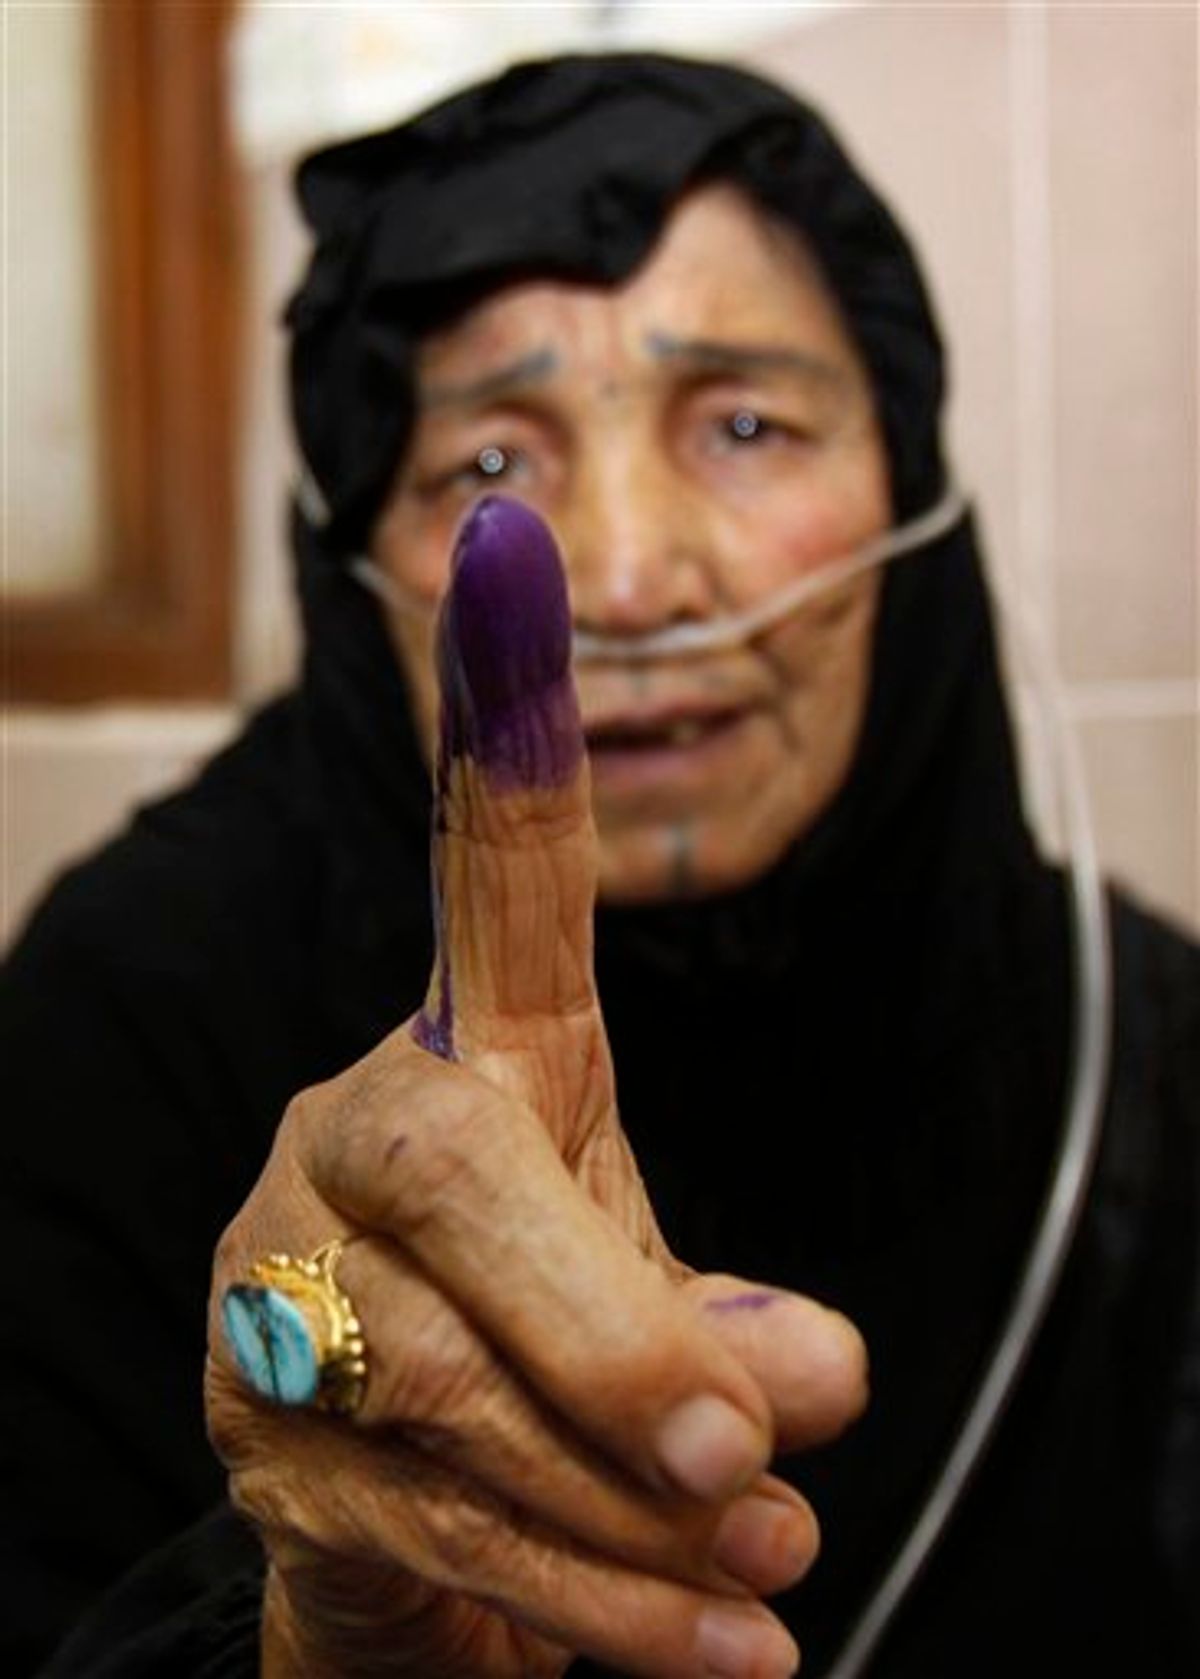 Hospital patient Coka Khudhyer, 72, attached to an oxygen tube, displays her inked finger after casting her vote at Al-Fayha hospital in Basra, Iraq, Thursday, March 4, 2010. Early voting in Iraq for detainees, hospital patients and military and security personnel is taking place Thursday, ahead of the parliamentary elections on Sunday, March 7, 2010. (AP Photo/Nabil al-Jurani) (AP)